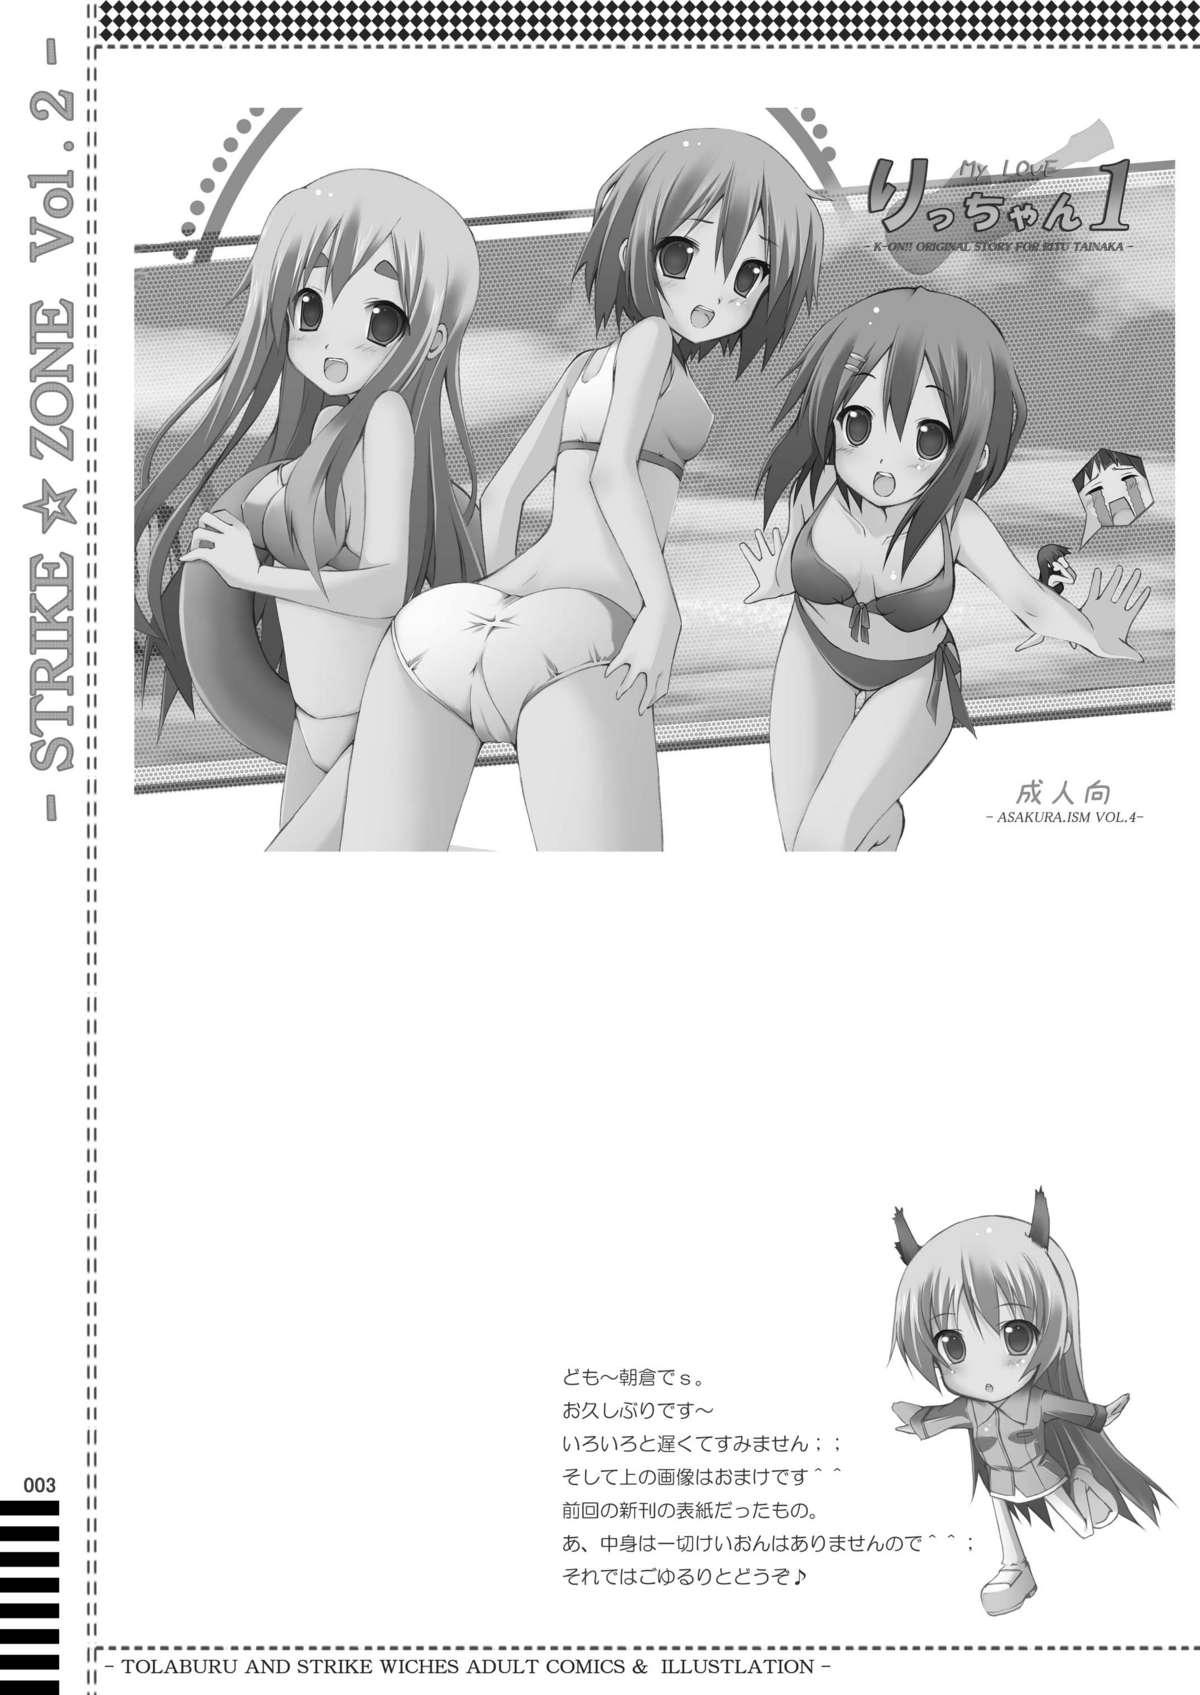 Abuse STRIKE☆ZONE 2 - Strike witches Dirty - Page 2